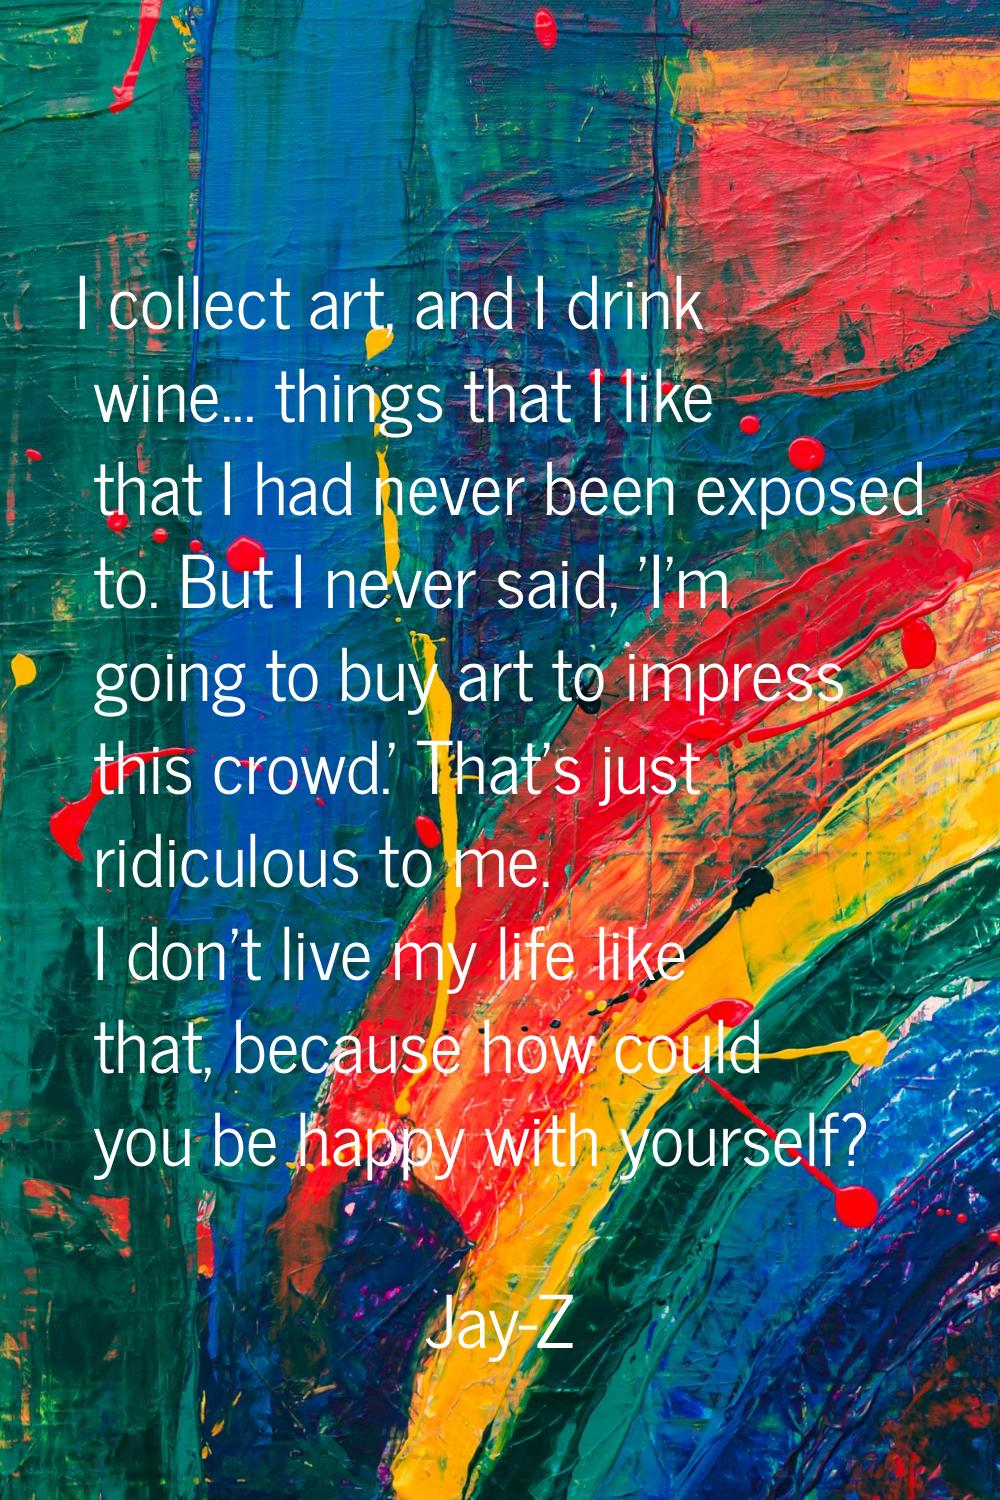 I collect art, and I drink wine... things that I like that I had never been exposed to. But I never